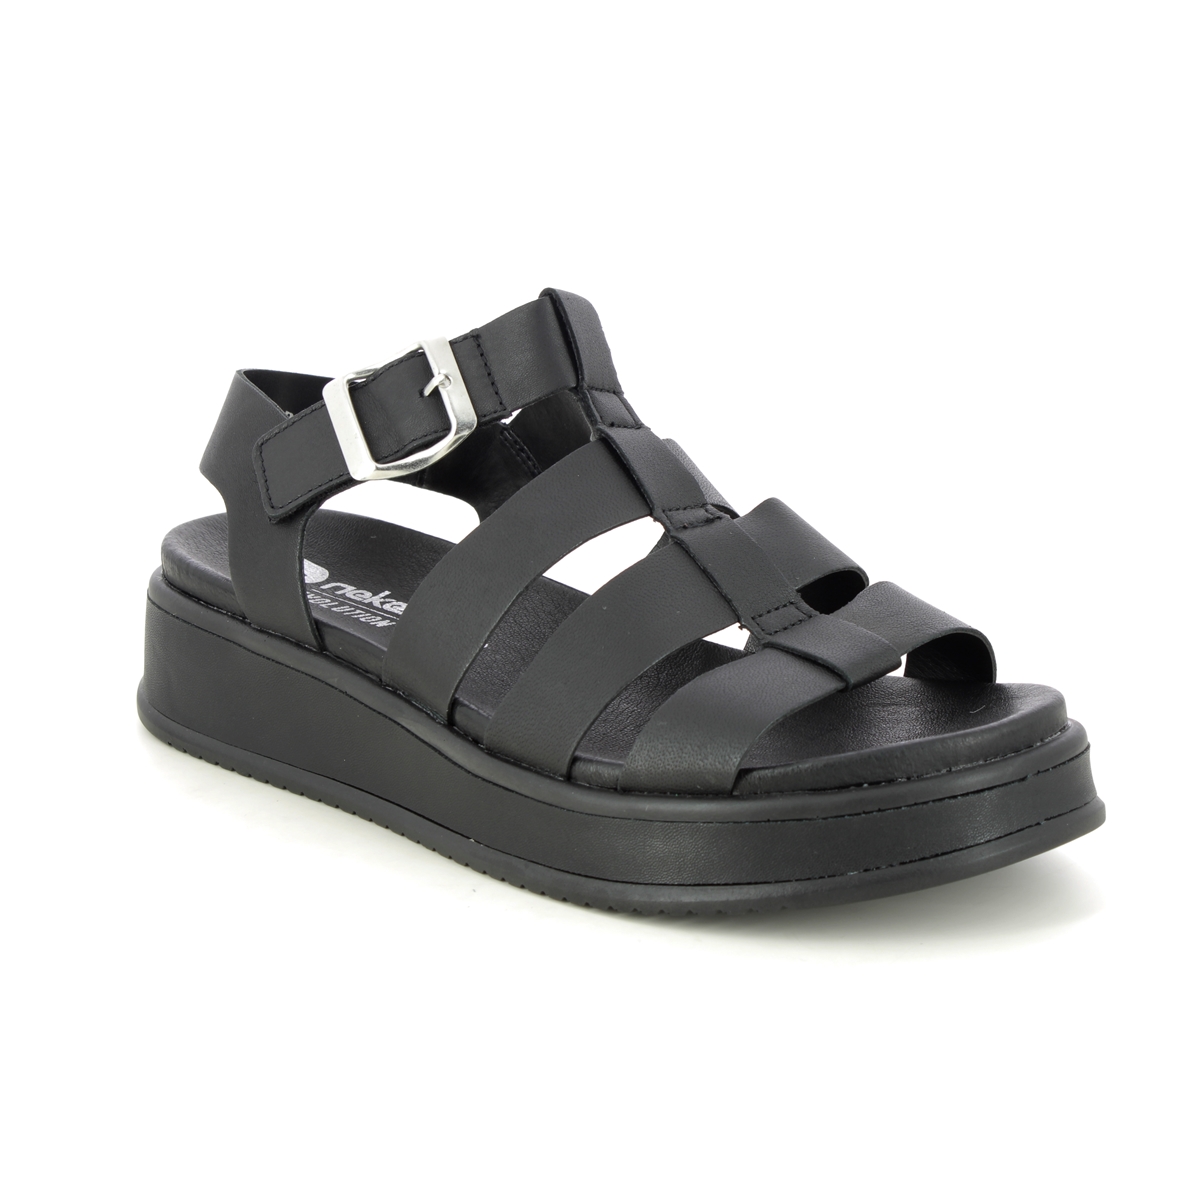 Rieker W0804-00 Black leather Womens Wedge Sandals in a Plain Leather in Size 40